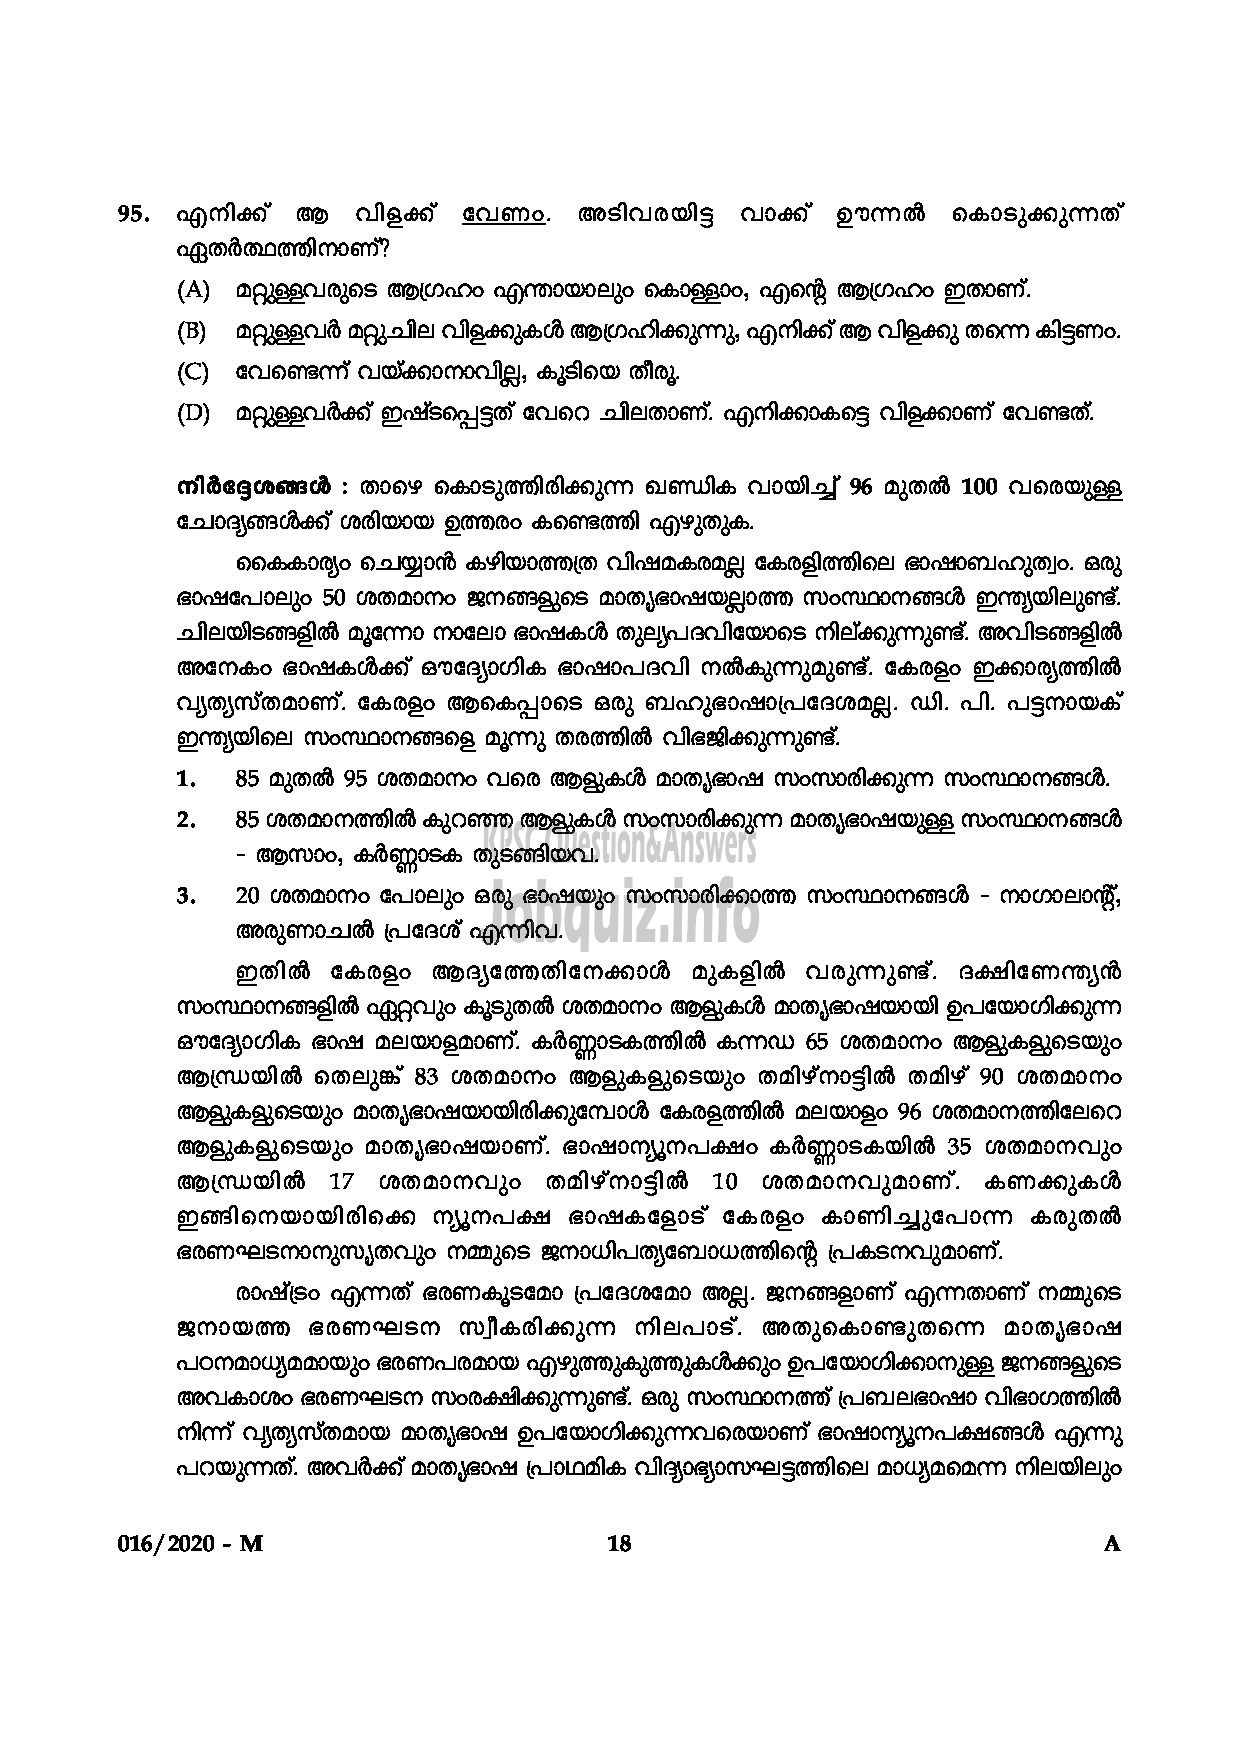 Kerala PSC Question Paper - KAS OFFICER (JUNIOR TIME SCALE) TRAINEE KERALA ADMINISTRATIVE SERVICE-18